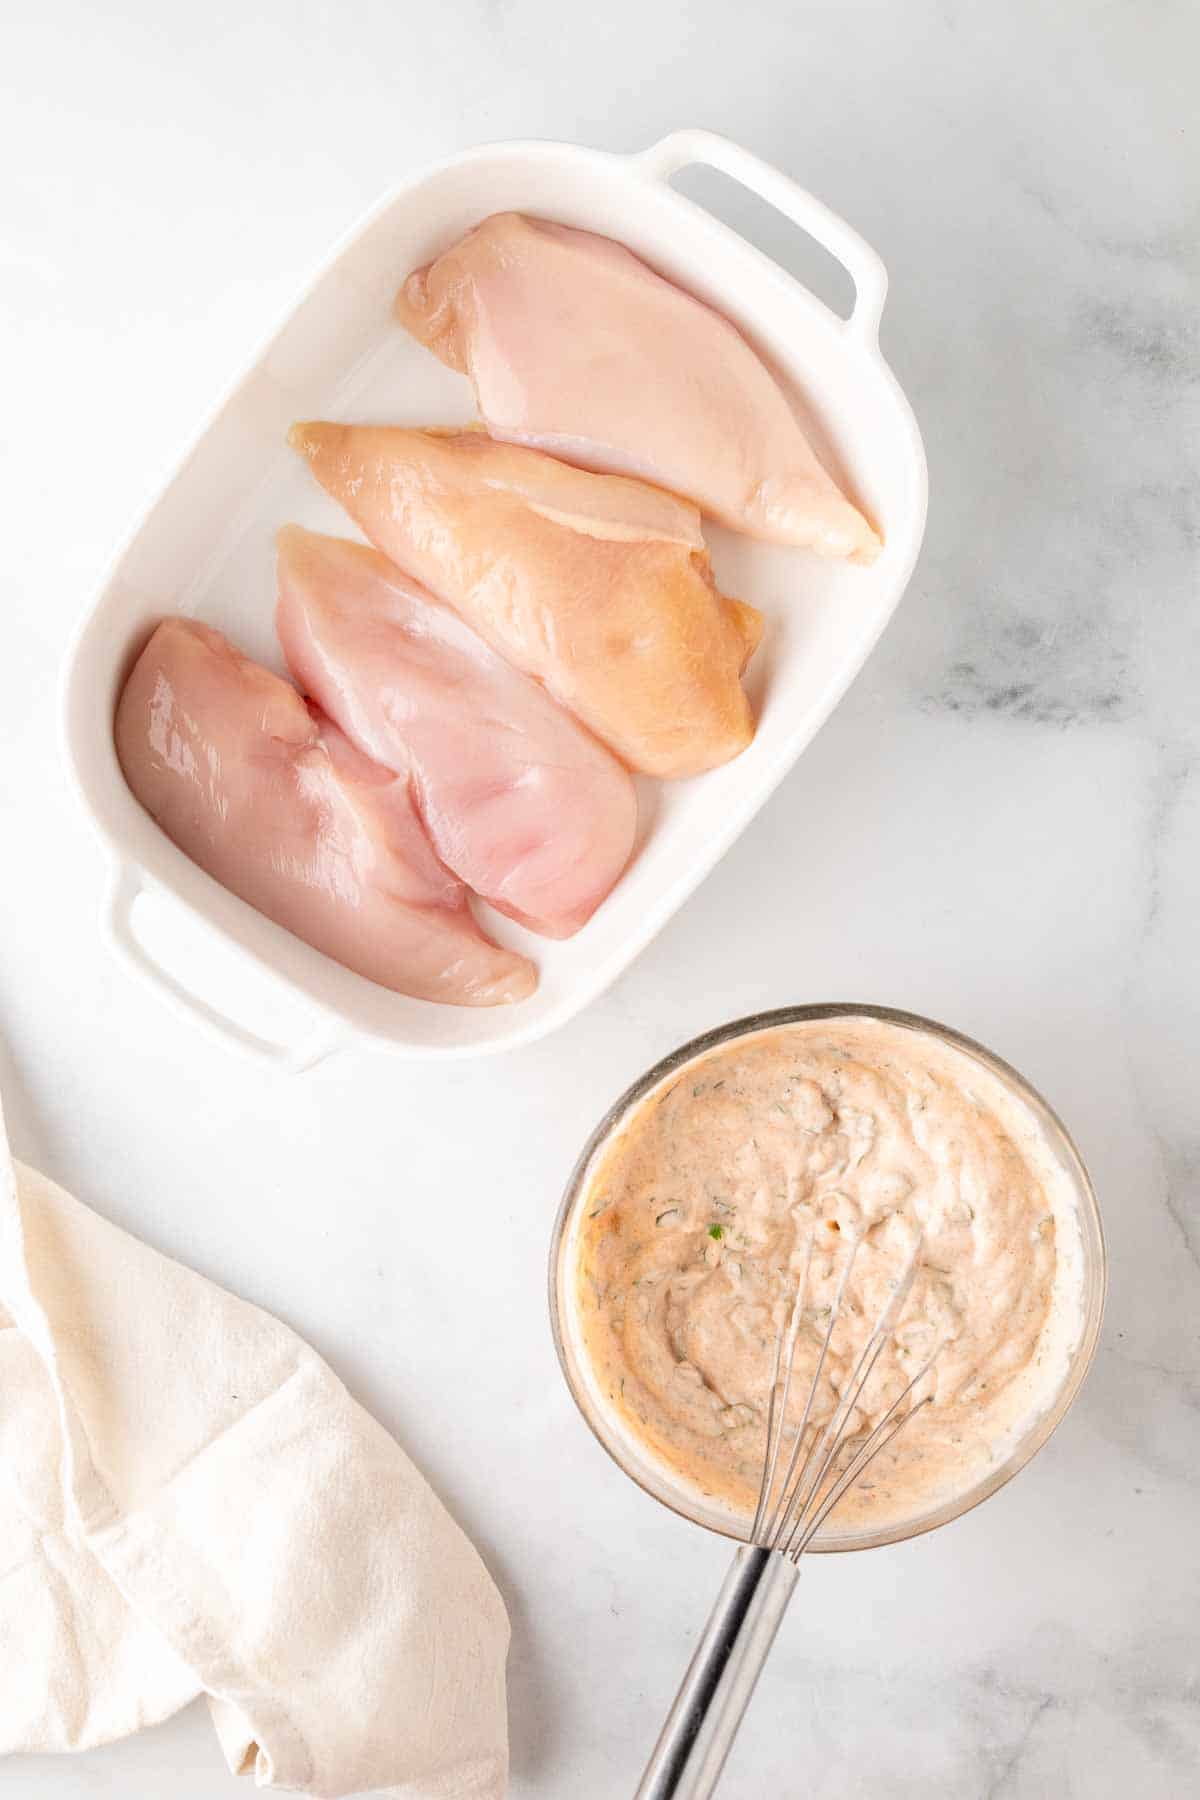 Four chicken breasts in a baking dish next to a glass dish with the marinade